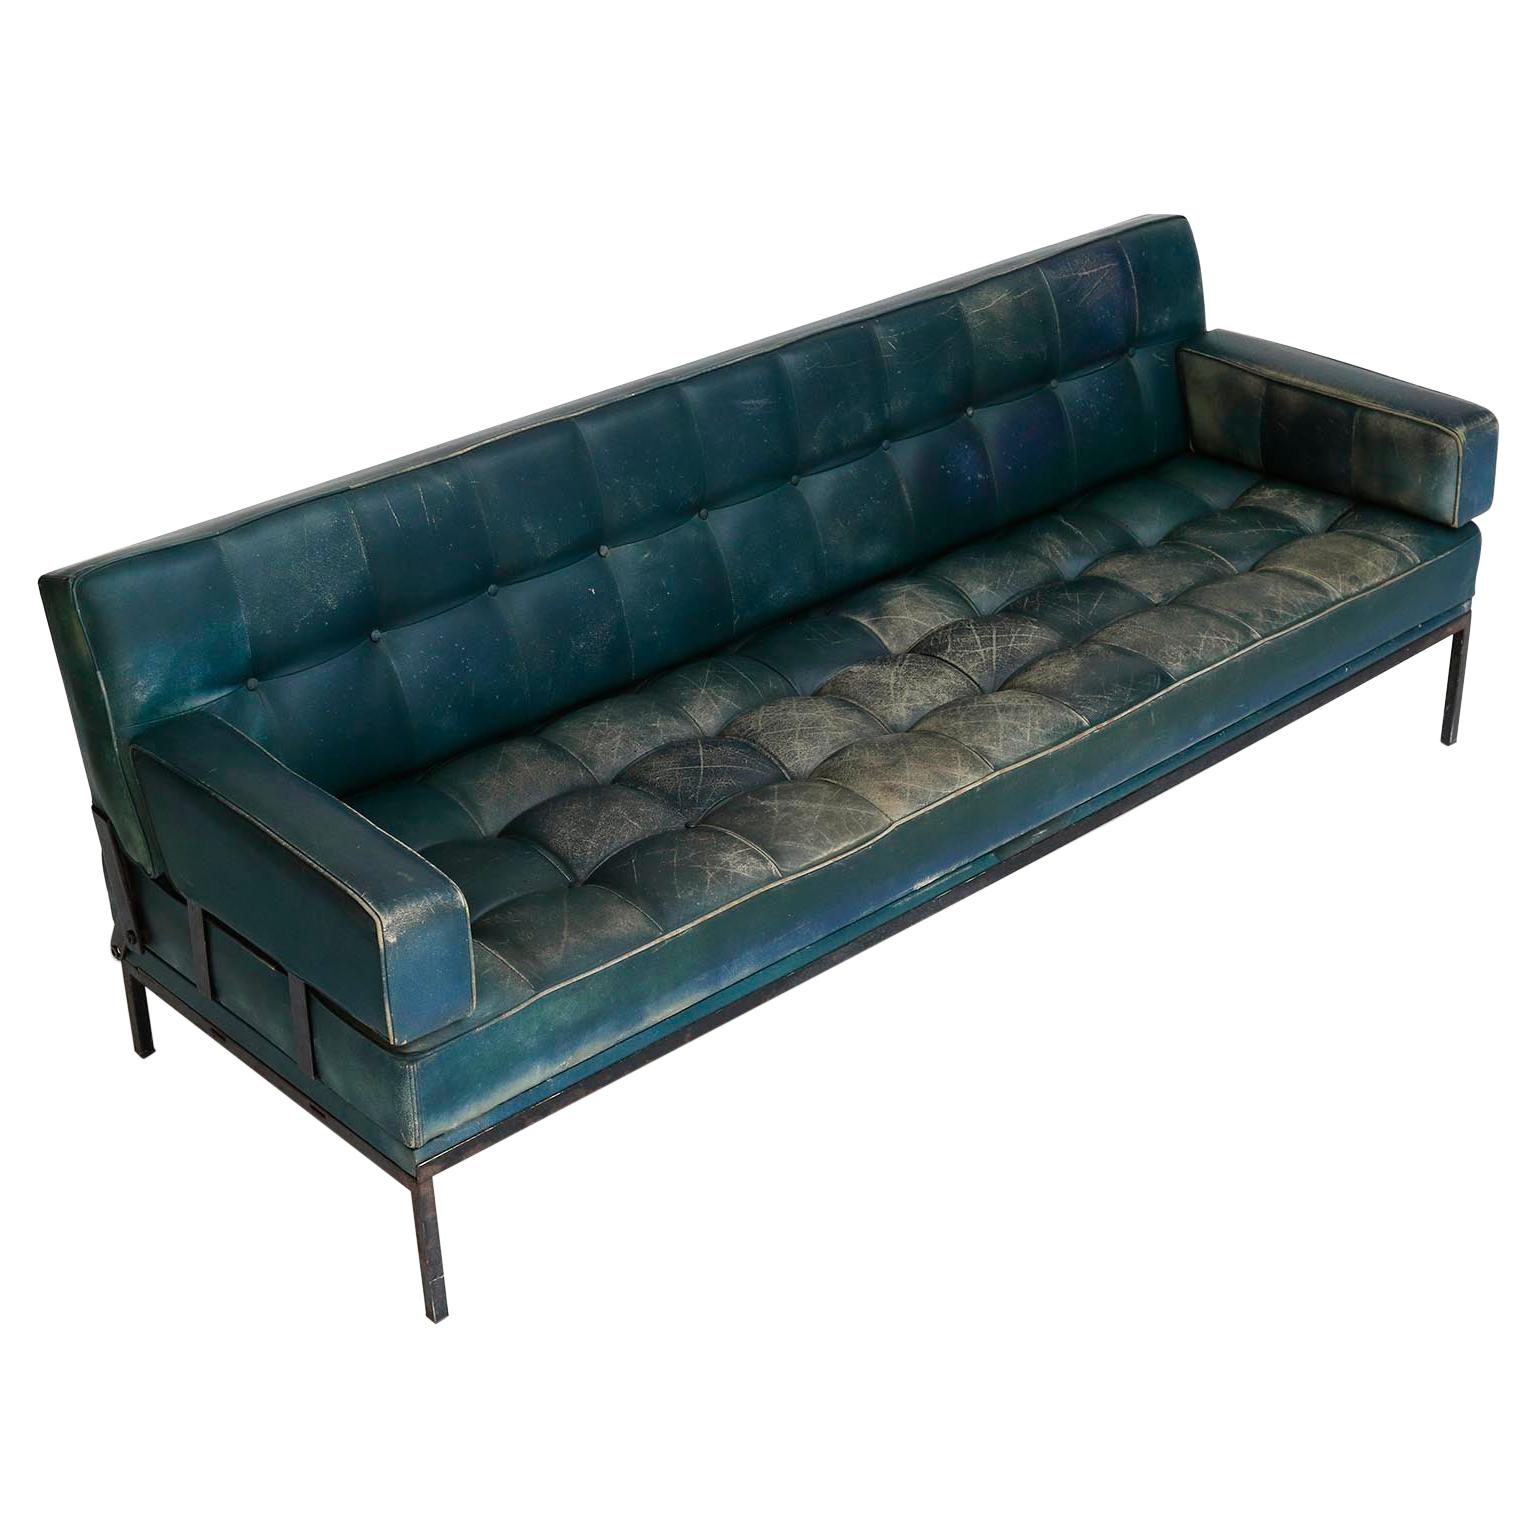 Johannes Spalt 'Constanze' Sofa Daybed Armrests, Patinated Green Leather, 1960s